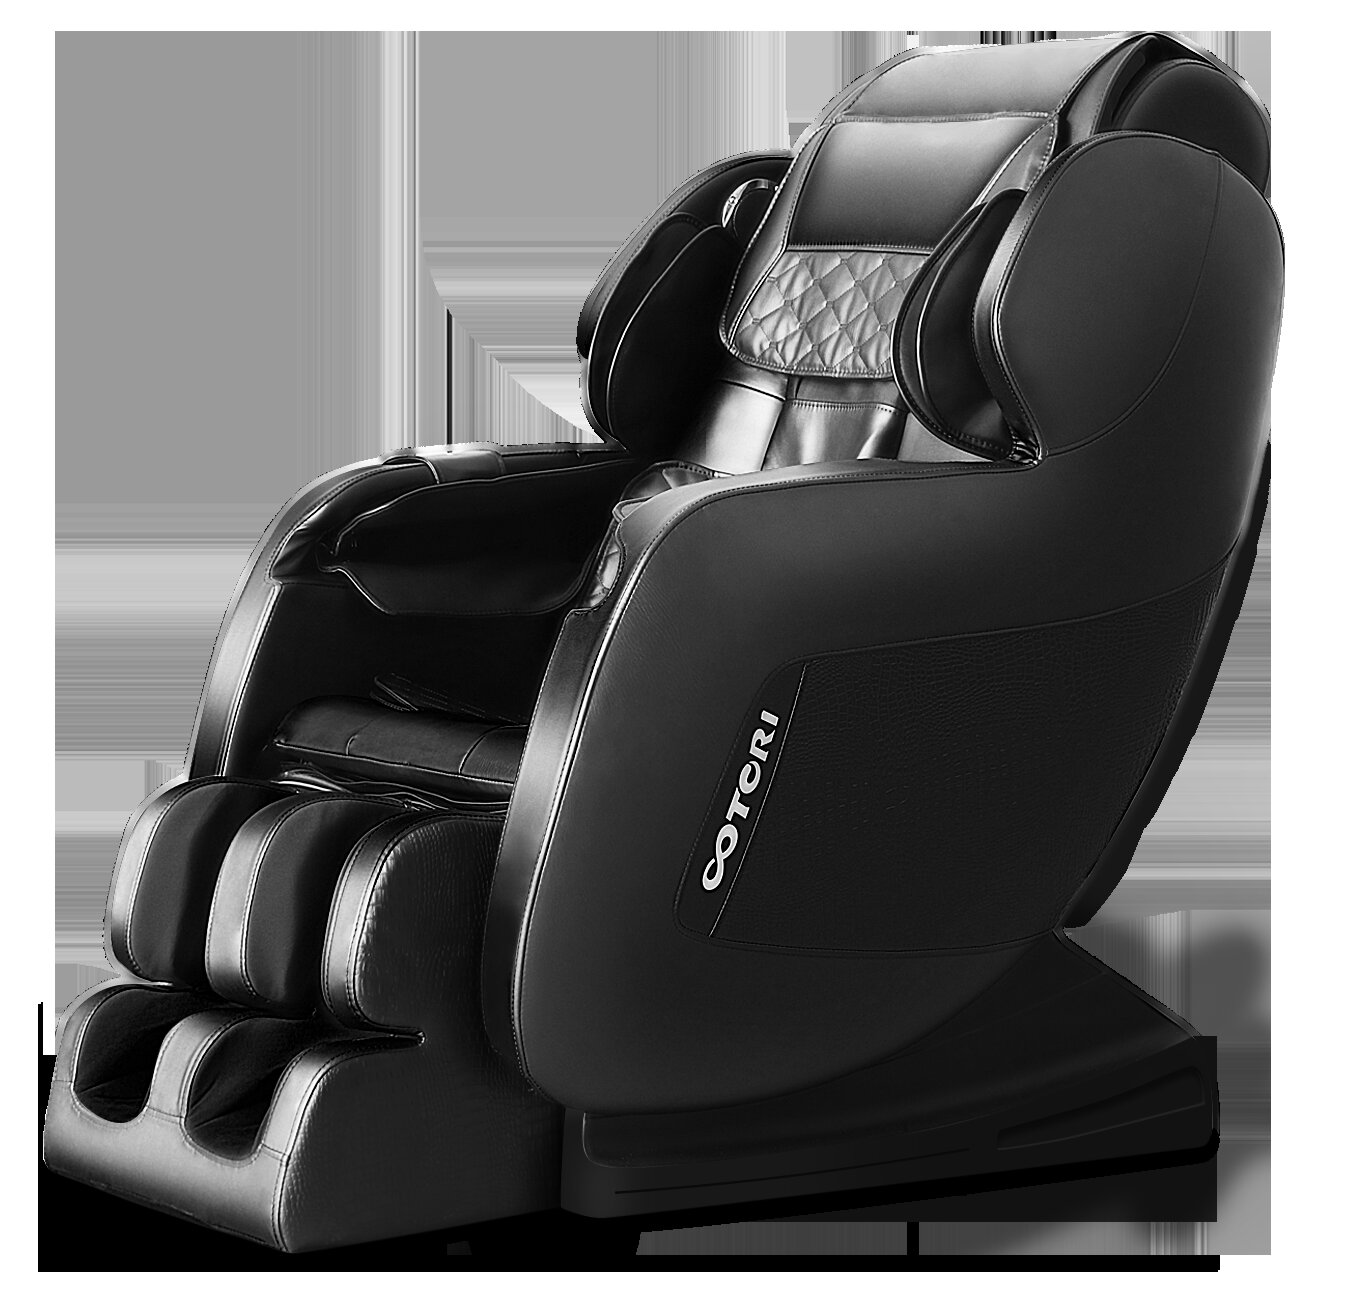 Ootori Massage Chairs The Nova N801 3d Robot Deluxe S Track